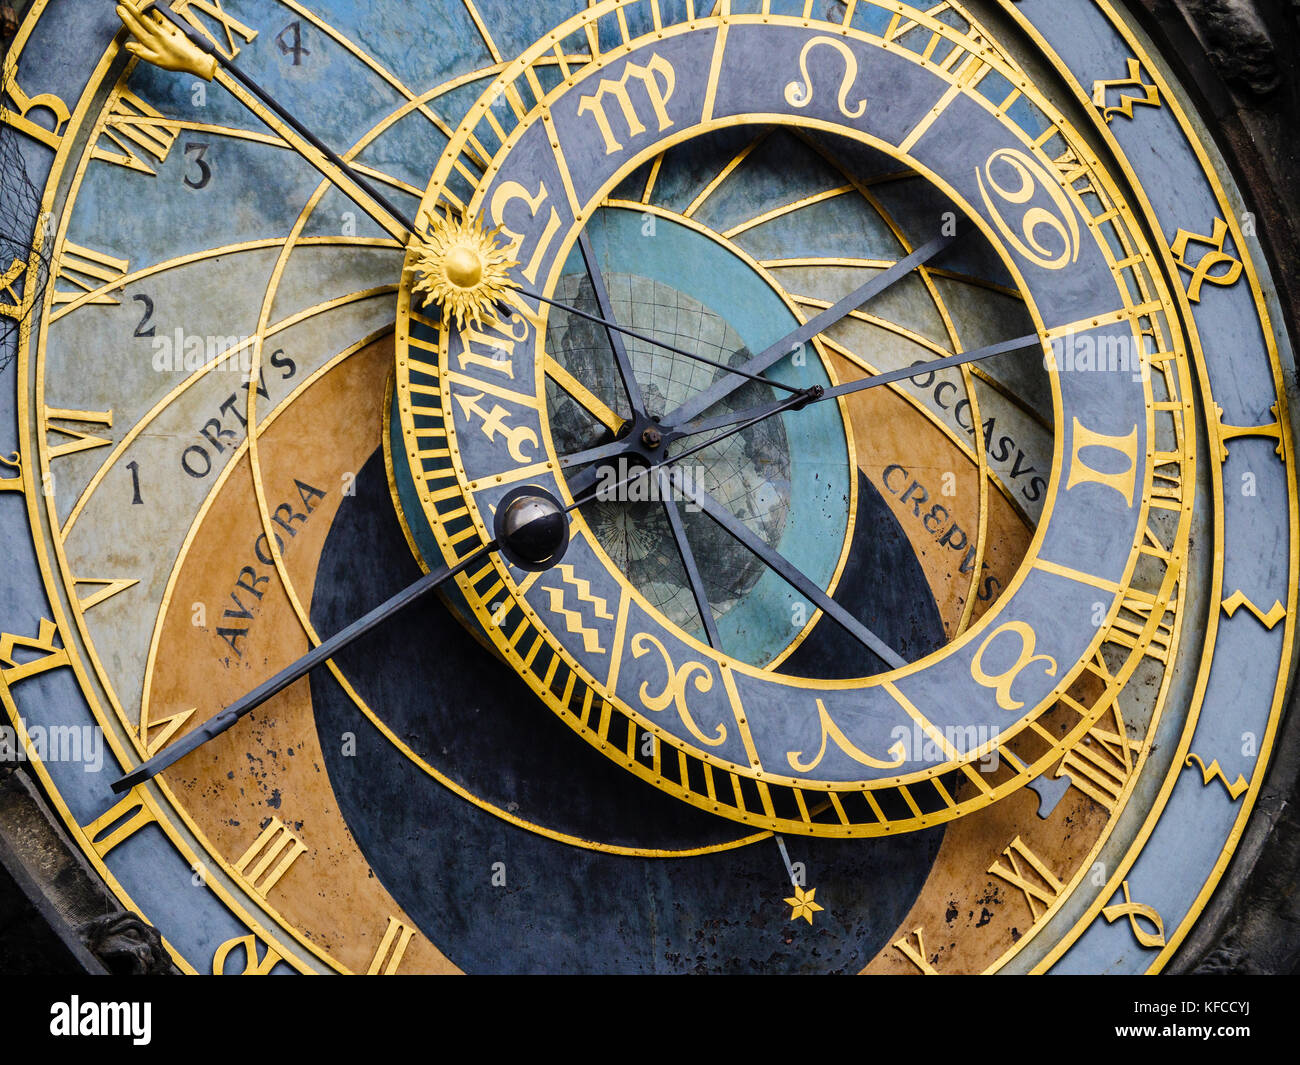 The astrological part of the astronomical clock Stock Photo